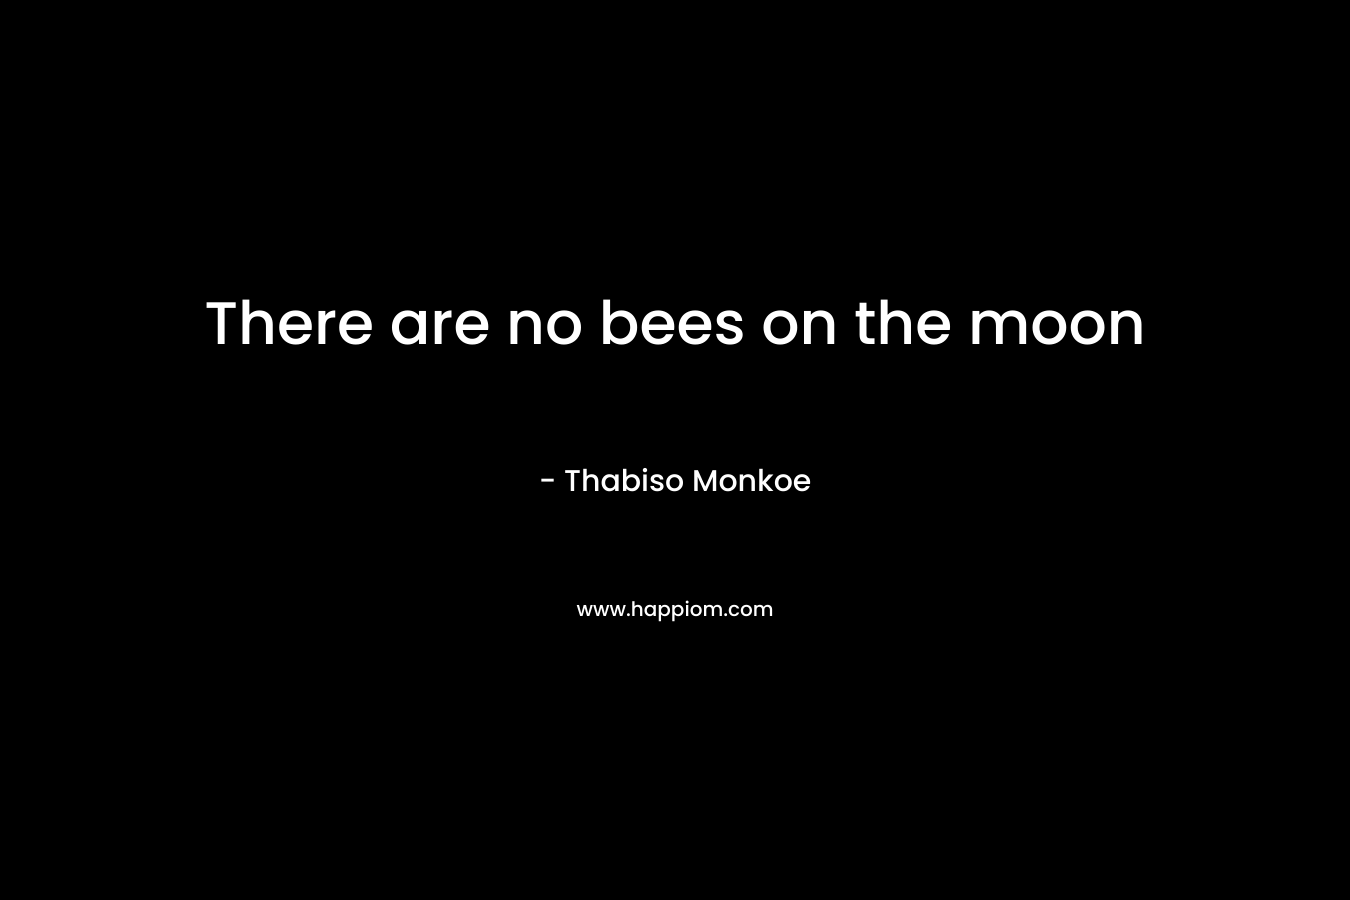 There are no bees on the moon